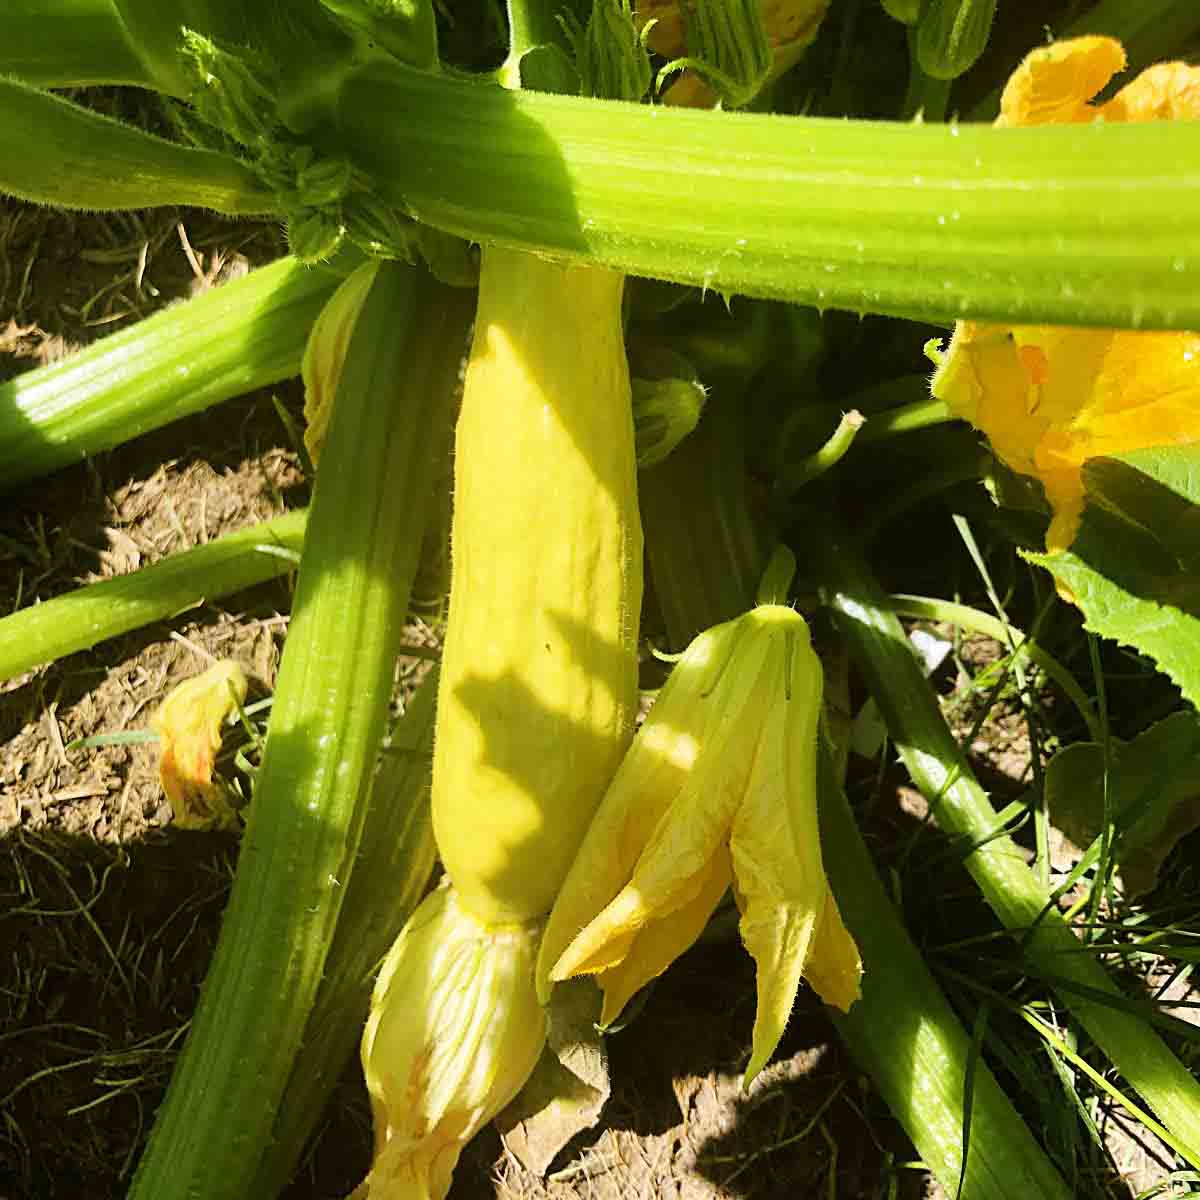 Small yellow summer squash grows on the vine.